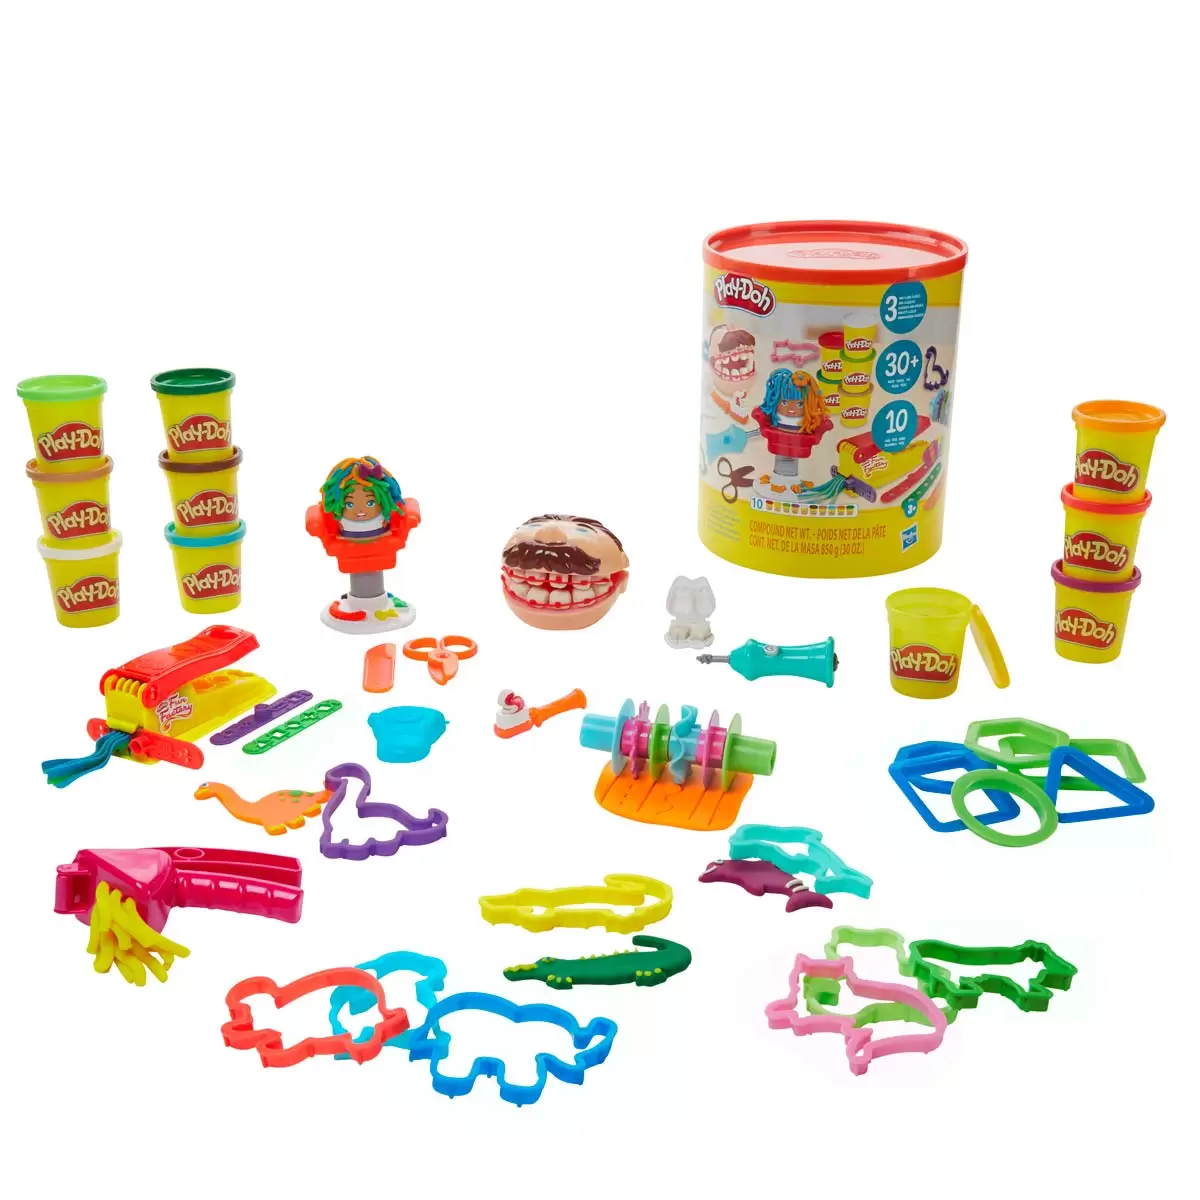 Buy Play Doh Cannister Included Image at Costco.co.uk